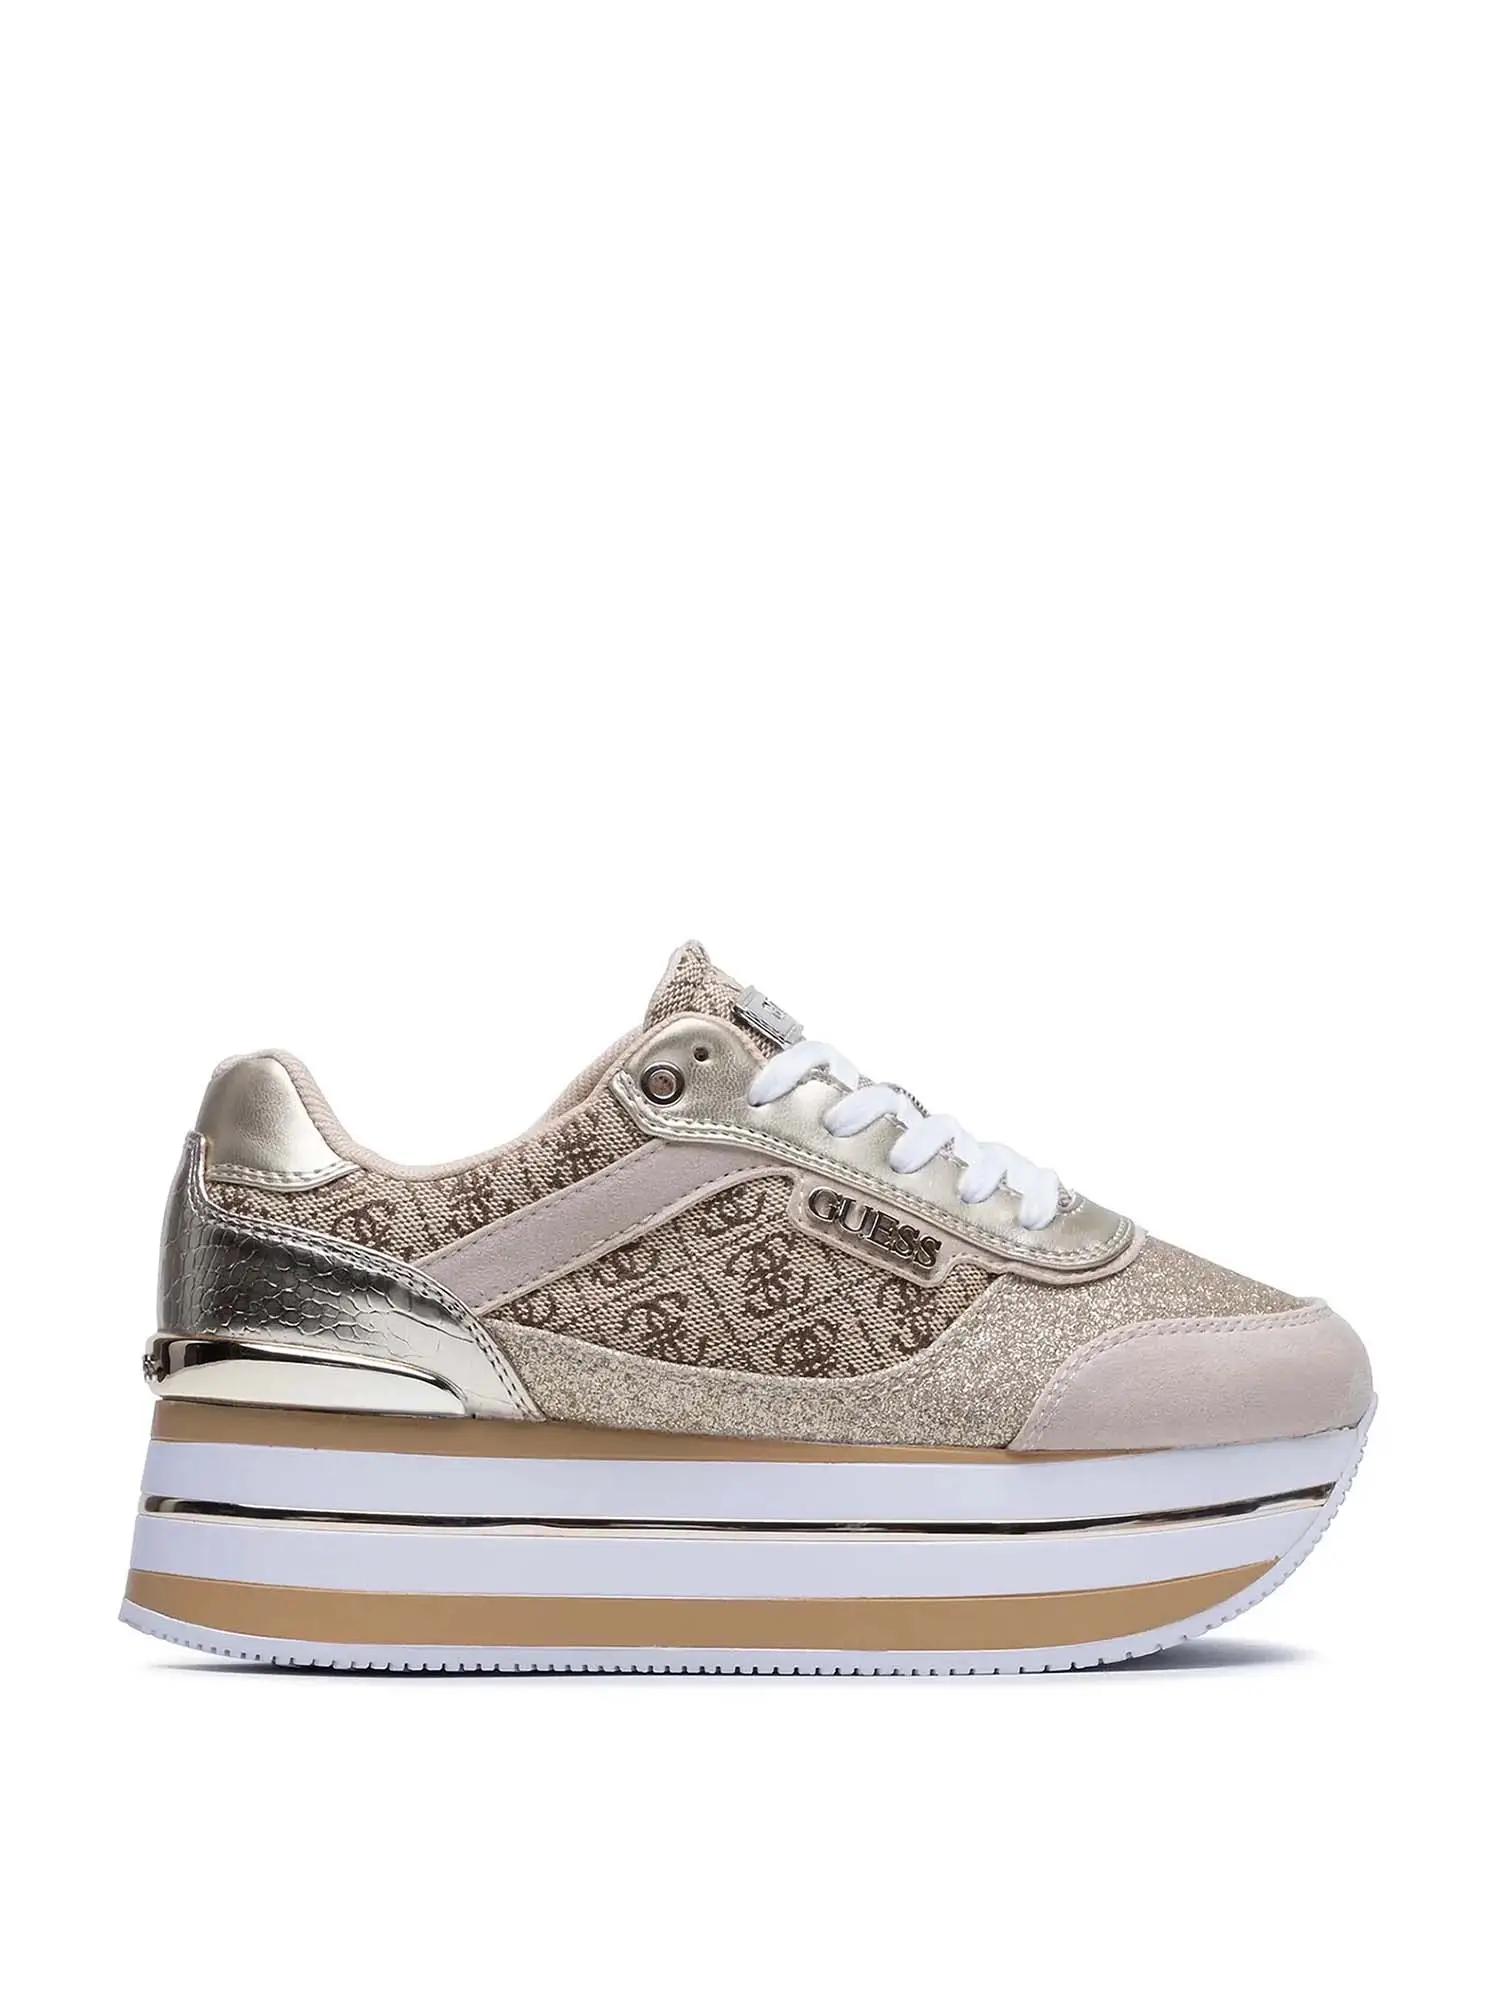 SNEAKERS DONNA - GUESS - FL5HNS FAL12 - BEIGE/MARRONE, 36